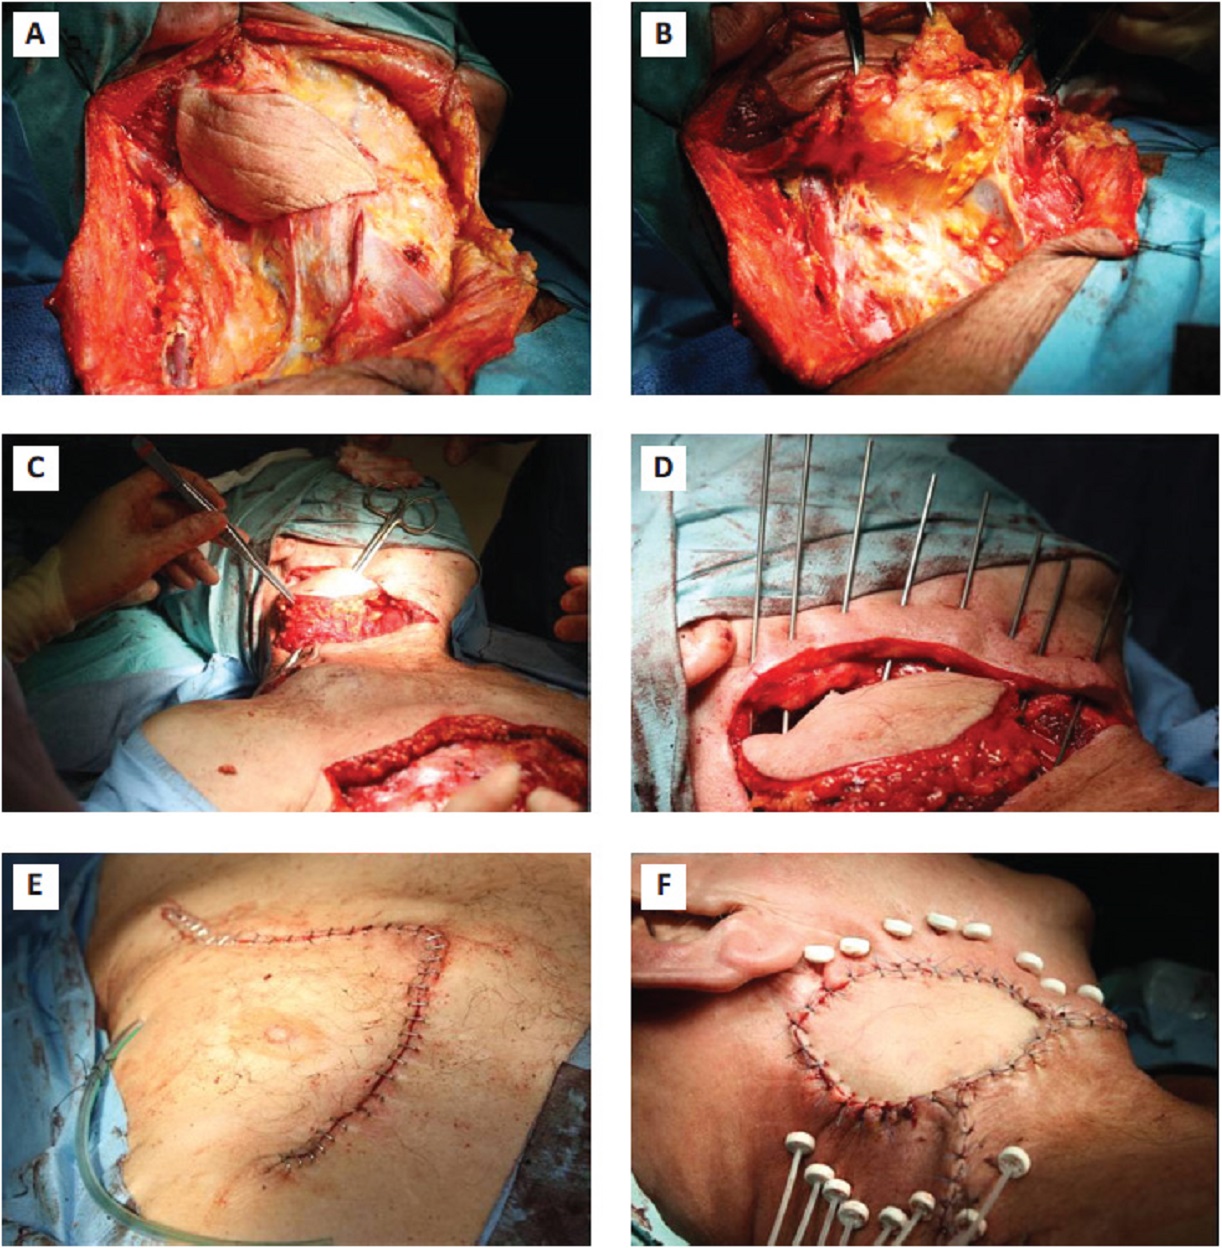 Exposed human flesh during neck surgery, inserted catheters and post-surgery stitches